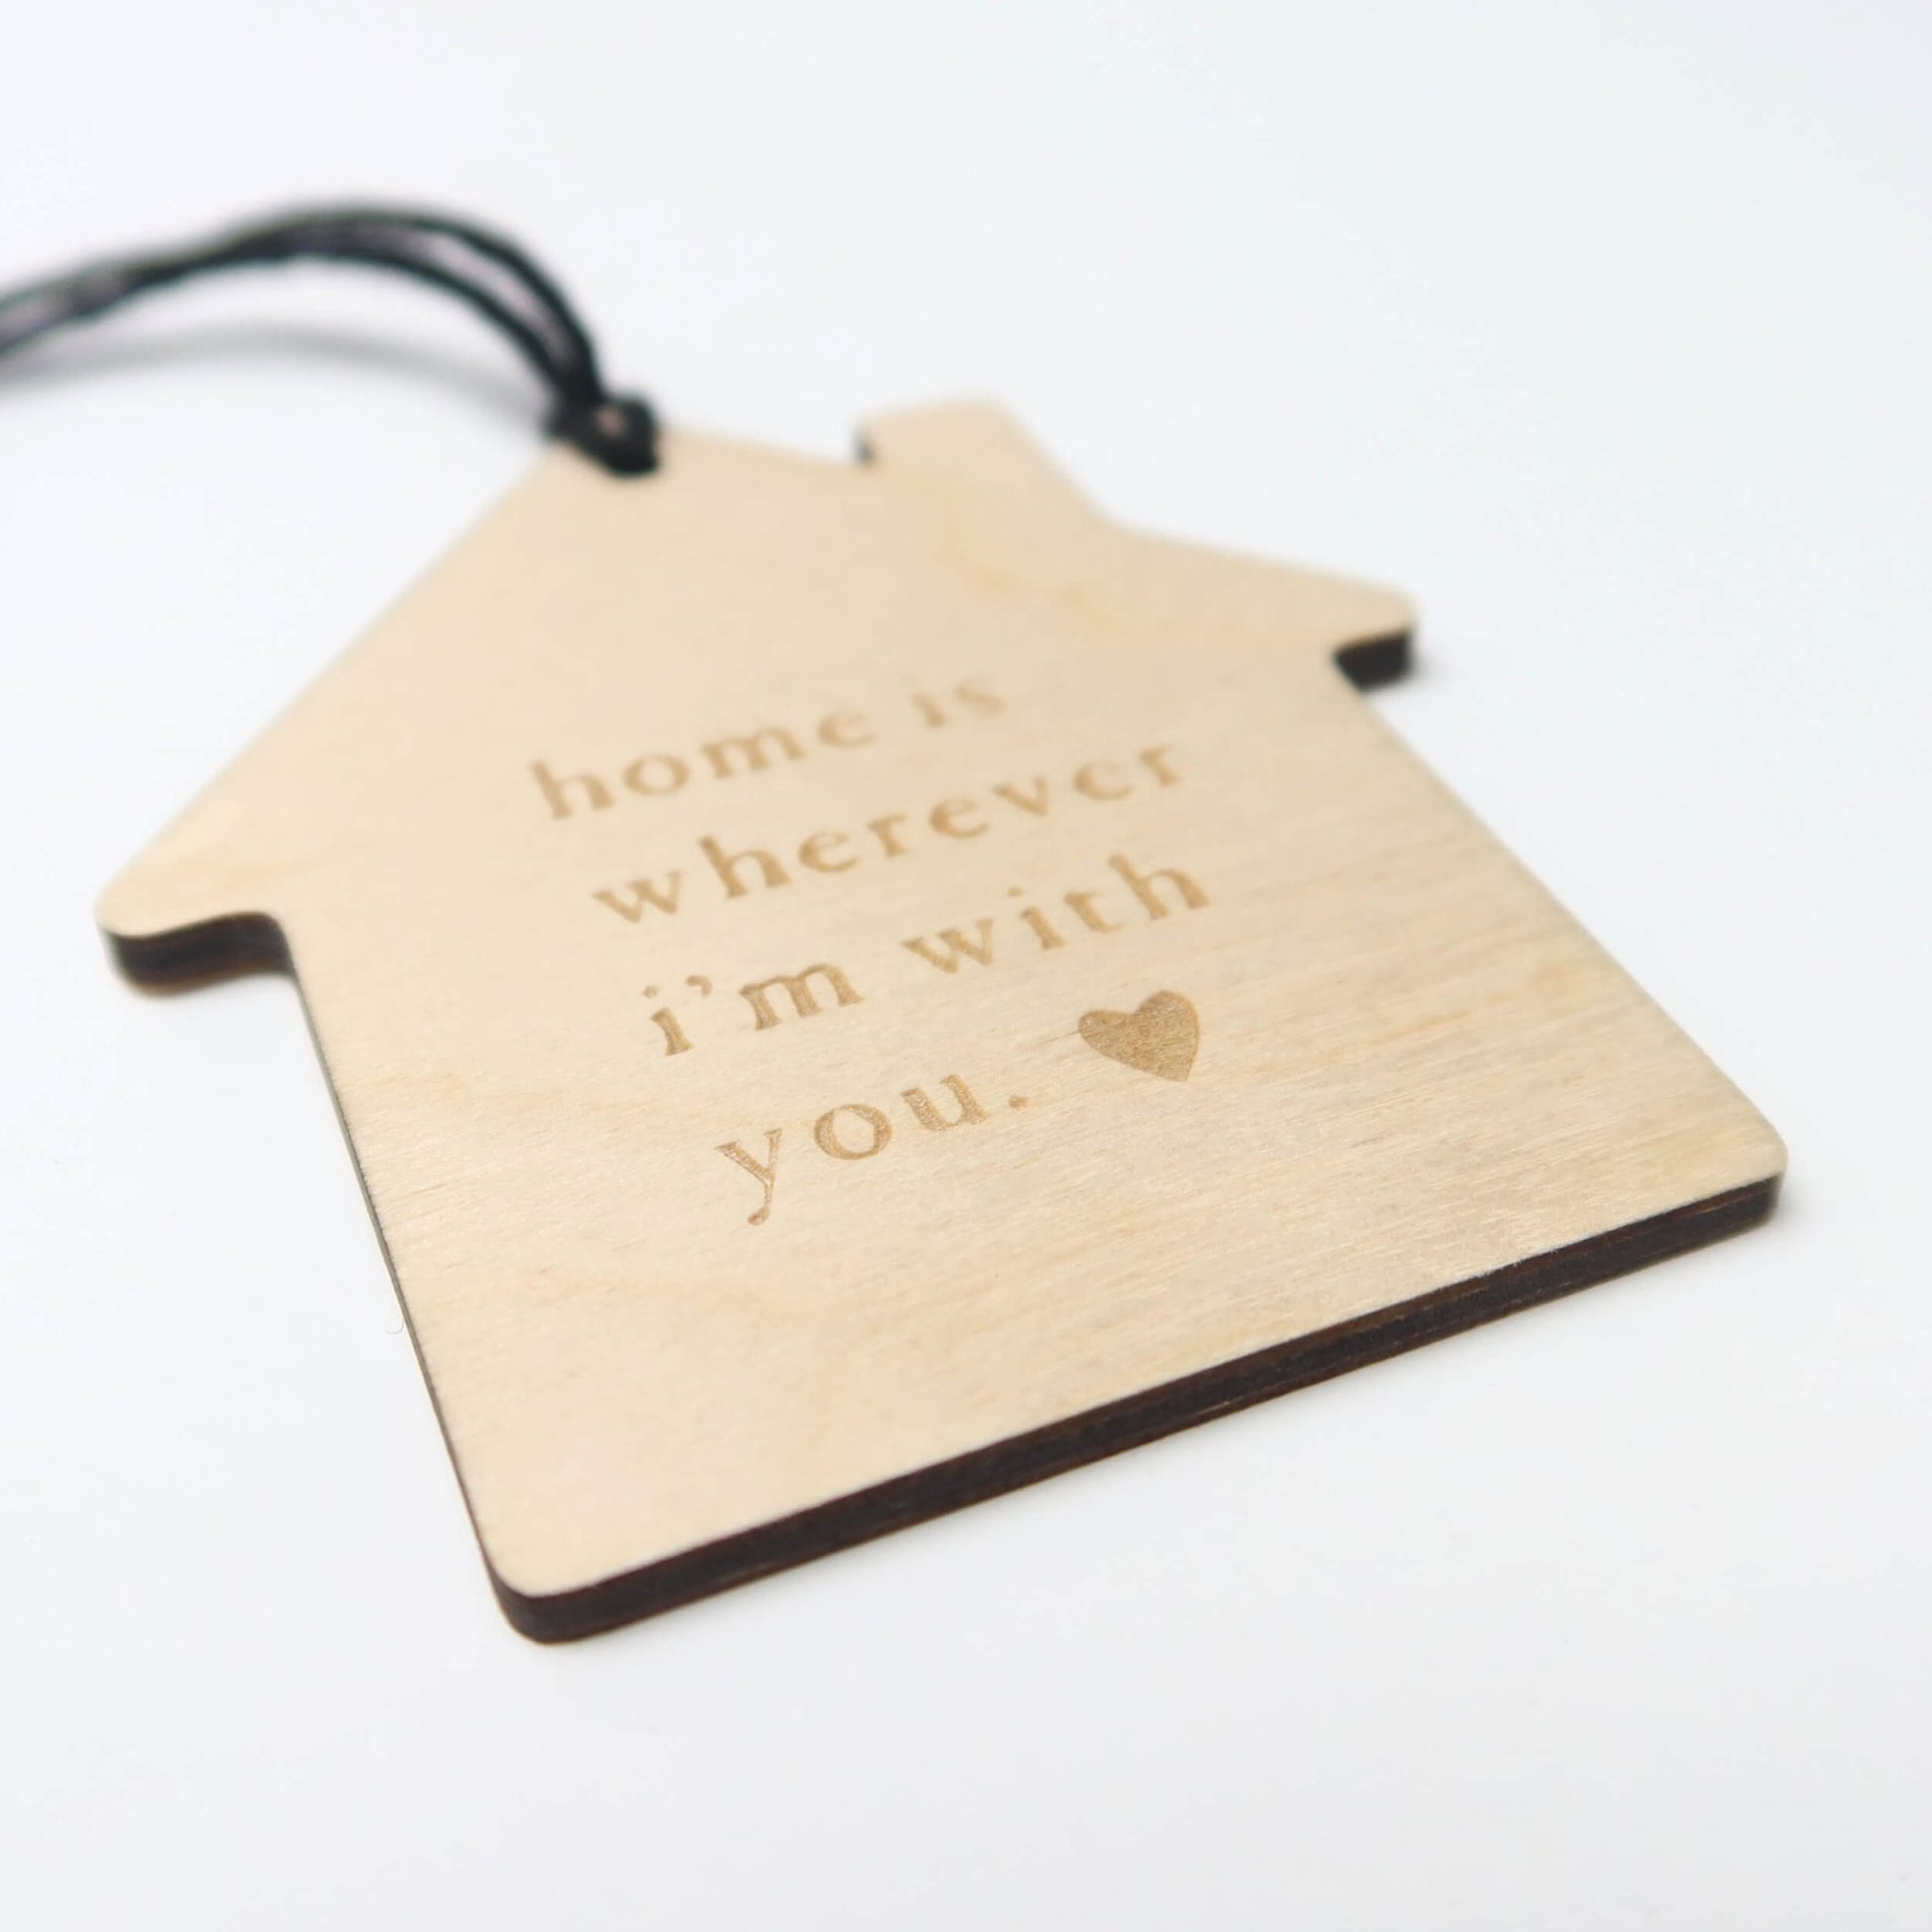 Home is Wherever I'm With You Ornament - Holiday Ornaments - Moon Rock Prints